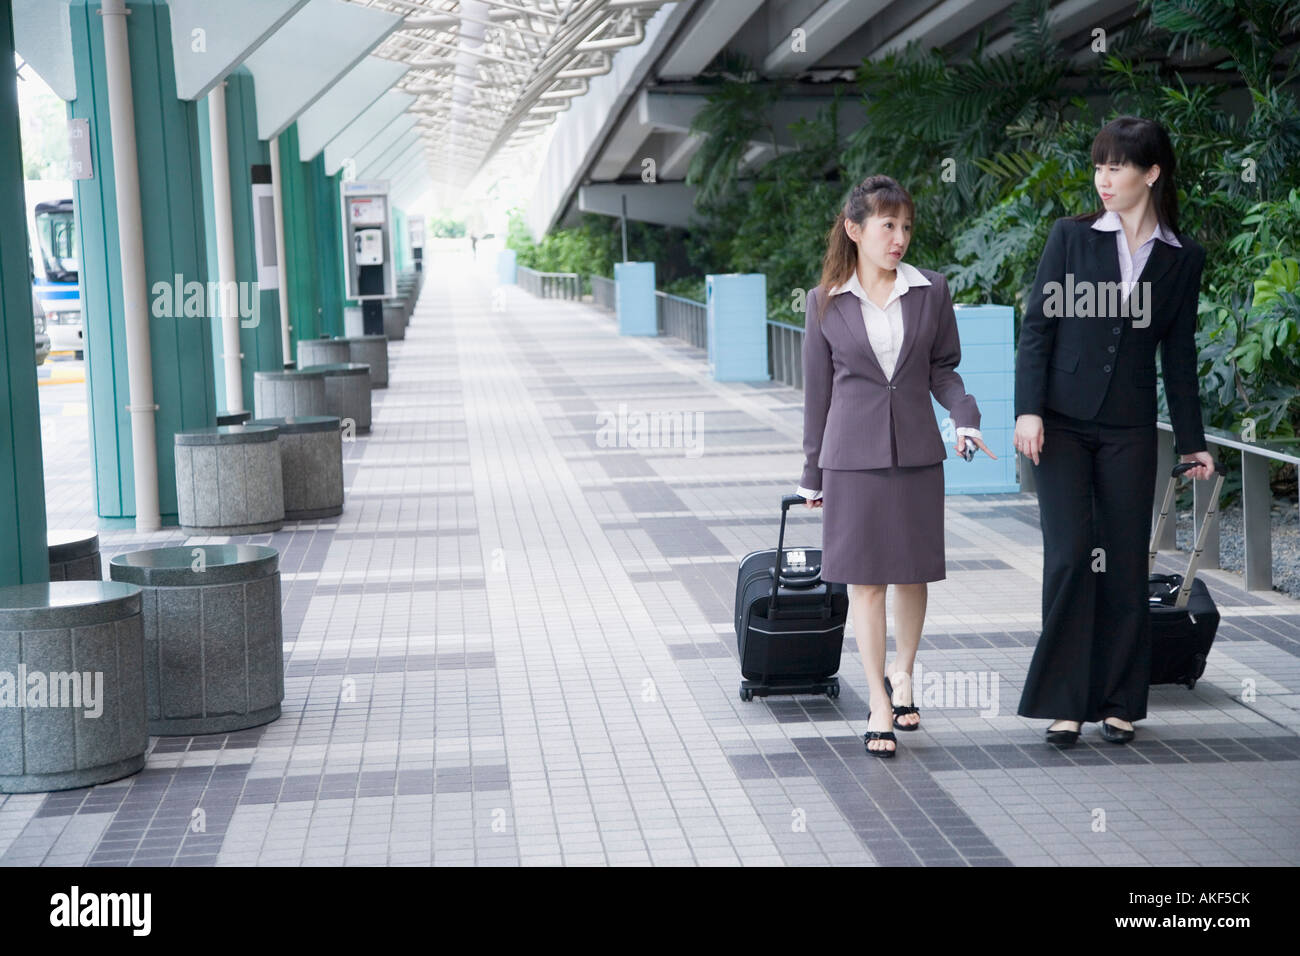 Two businesswomen walking on a walkway with their luggage Stock Photo